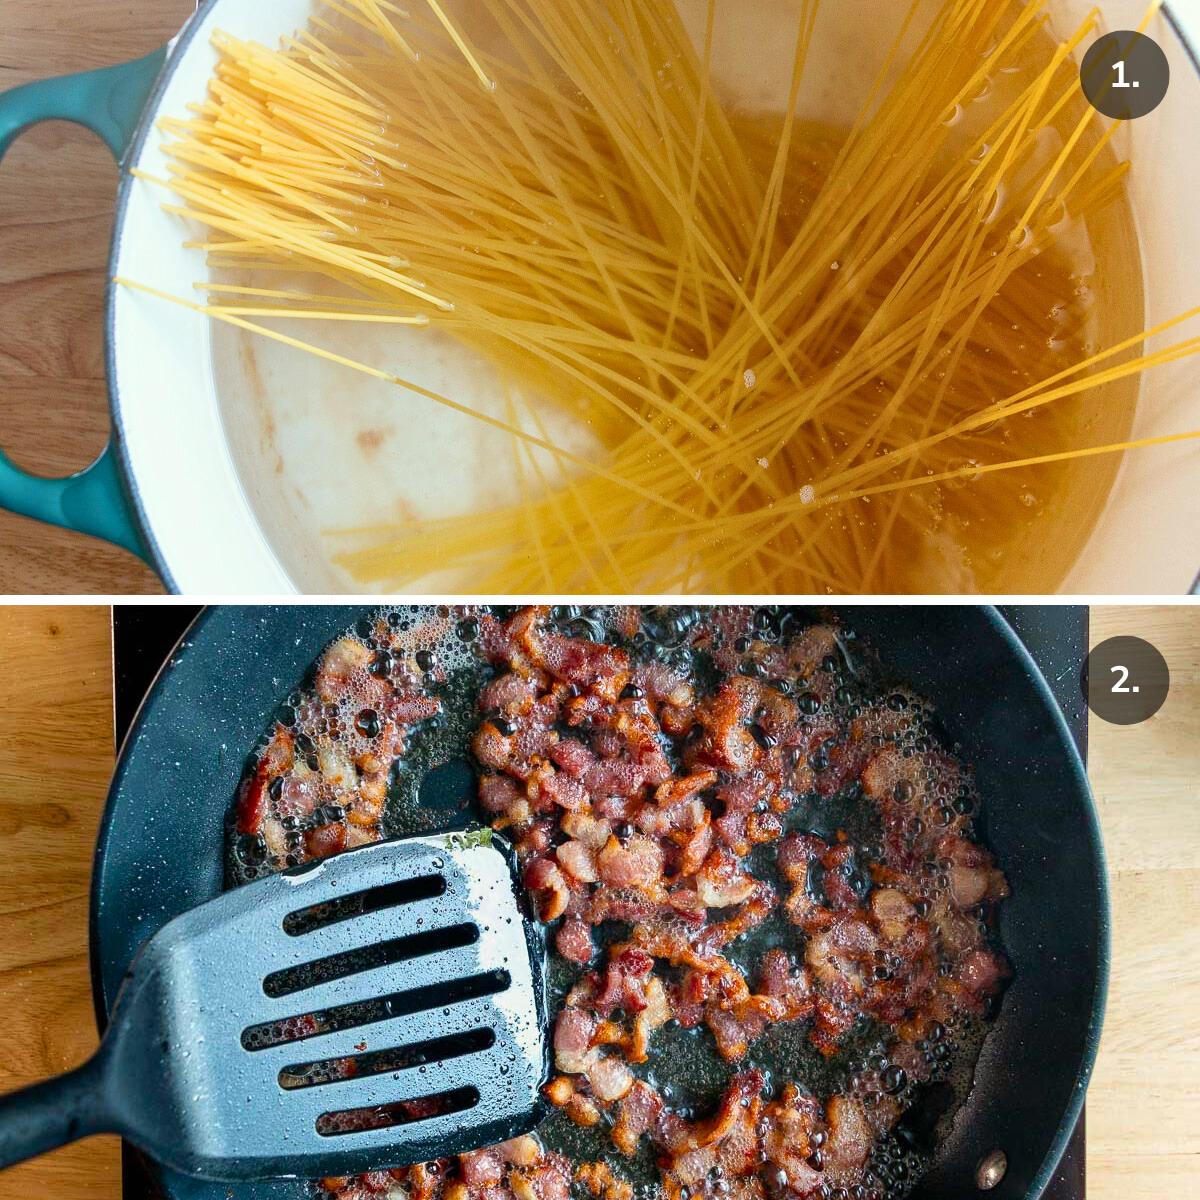 Boiling spaghetti noodles and frying up crispy bacon.